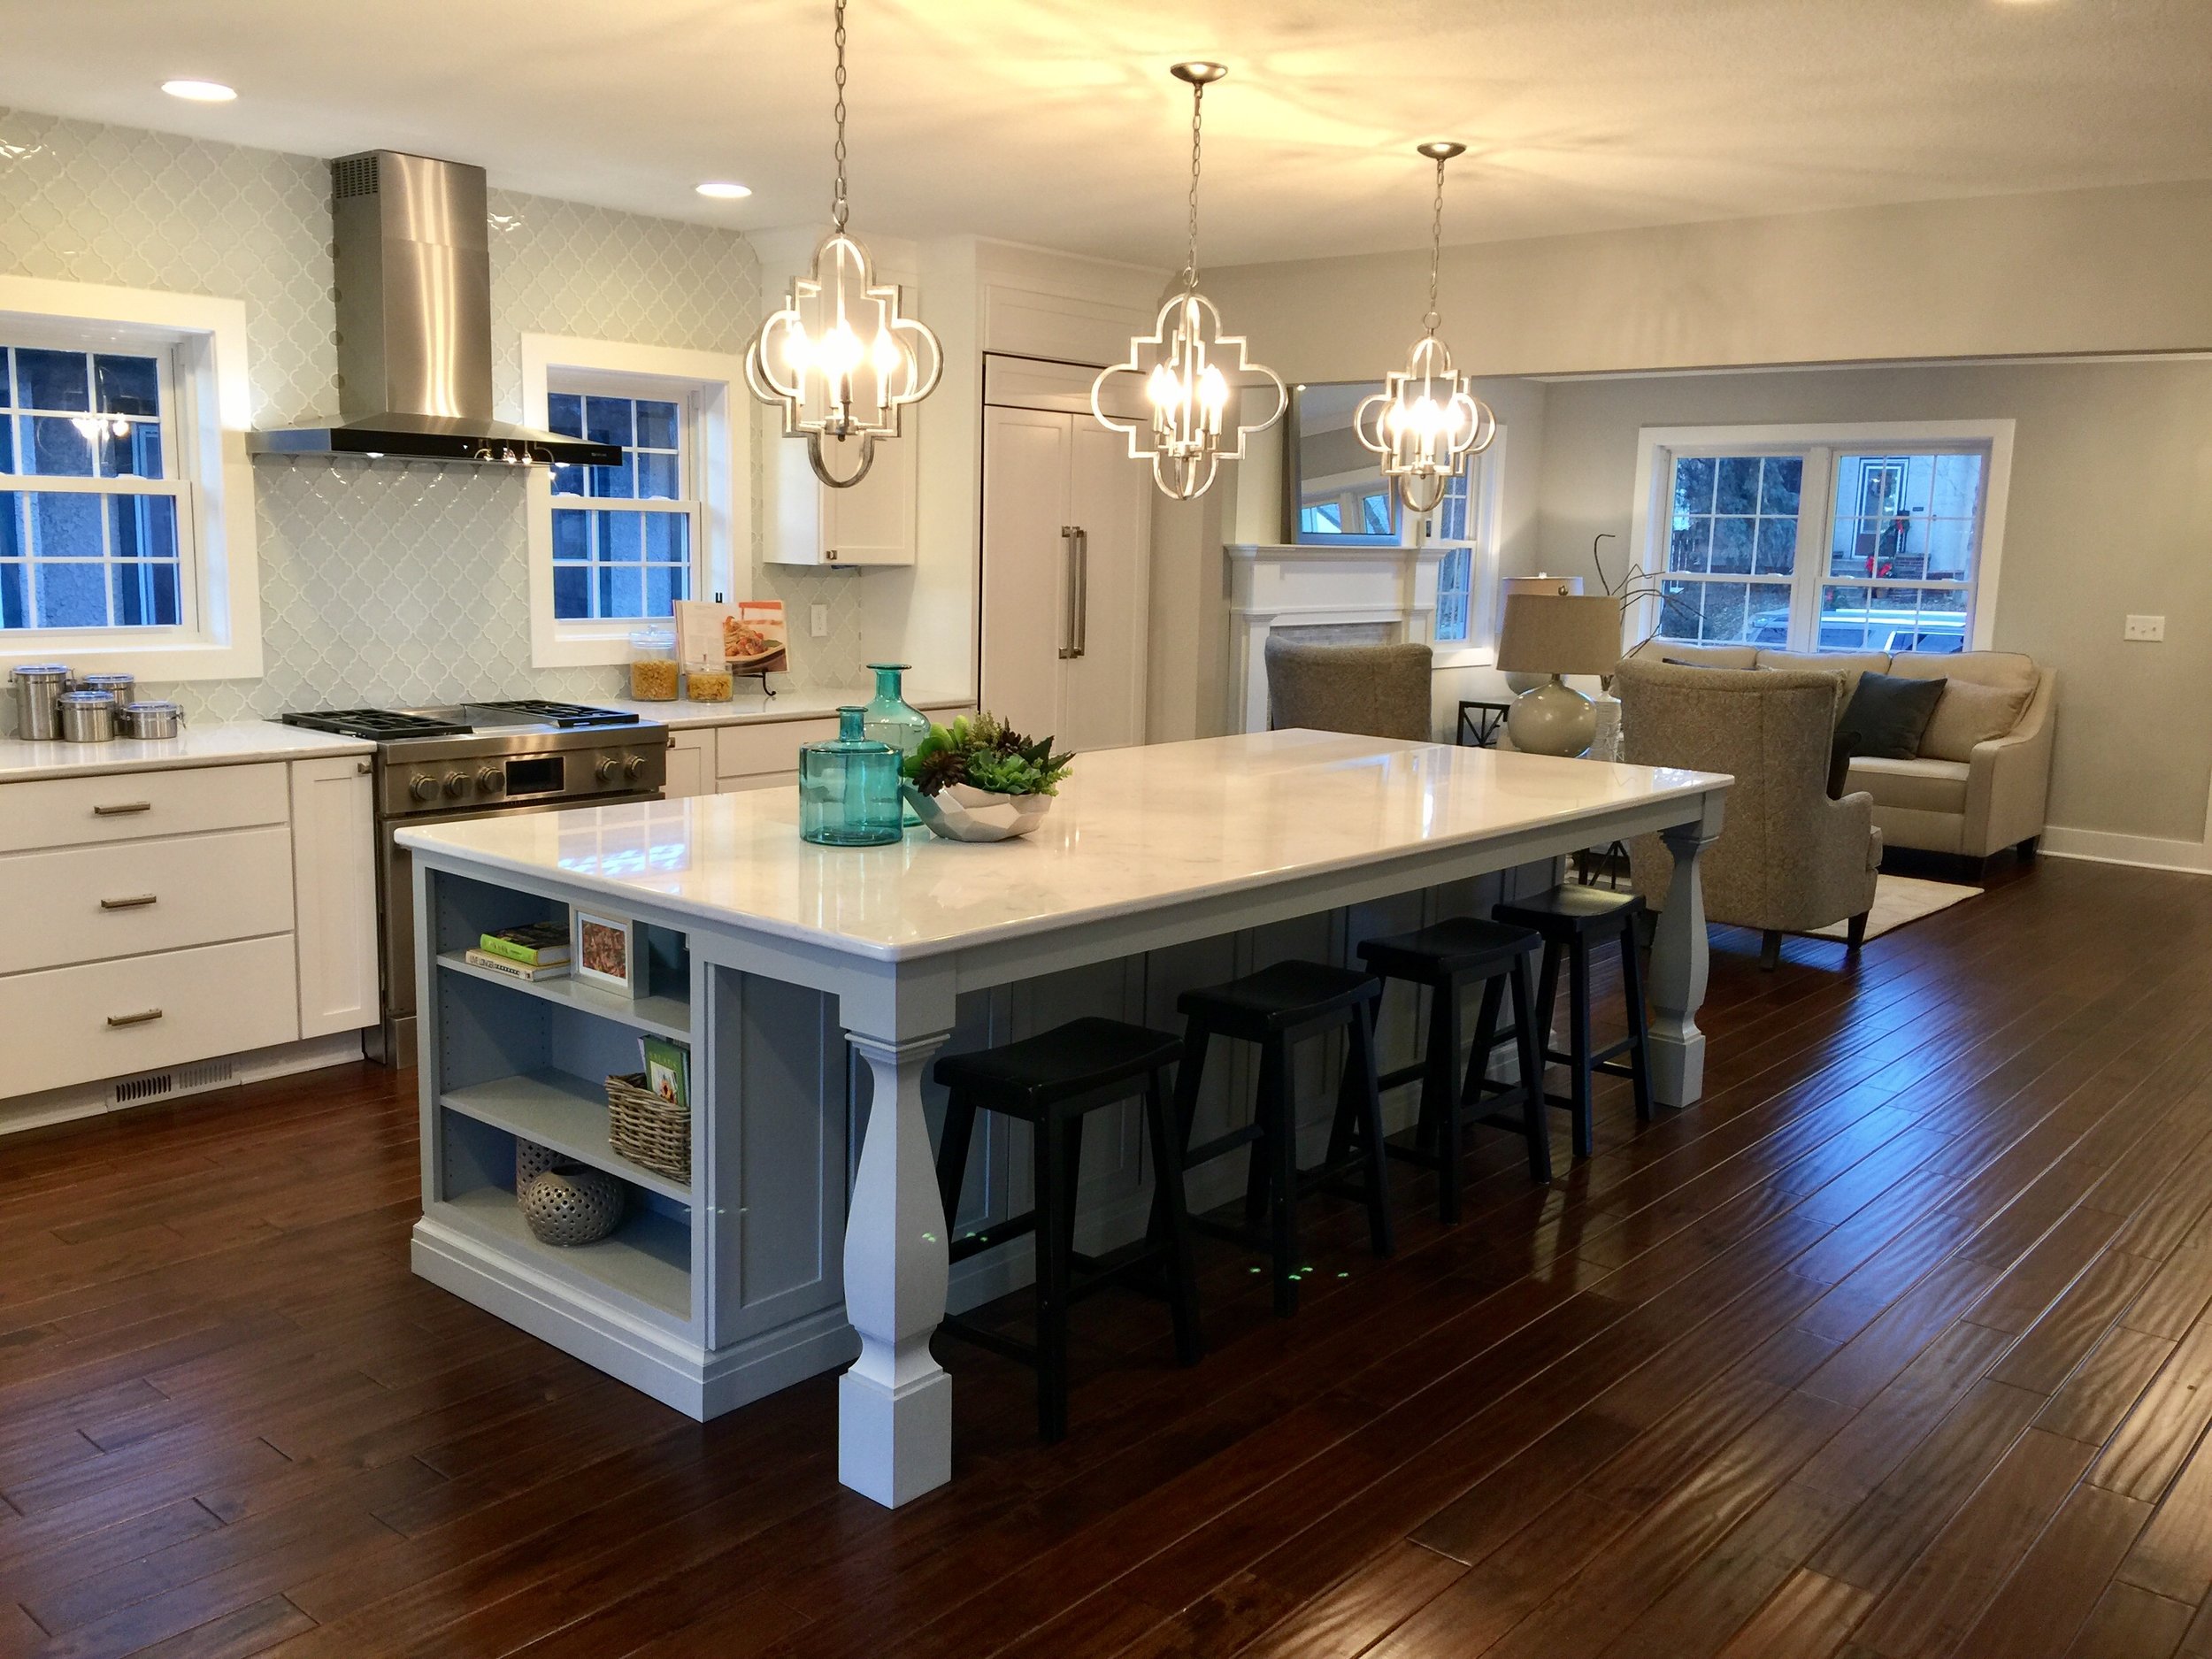 How To Choose The Best Pendant Lighting For Over Your Kitchen ...